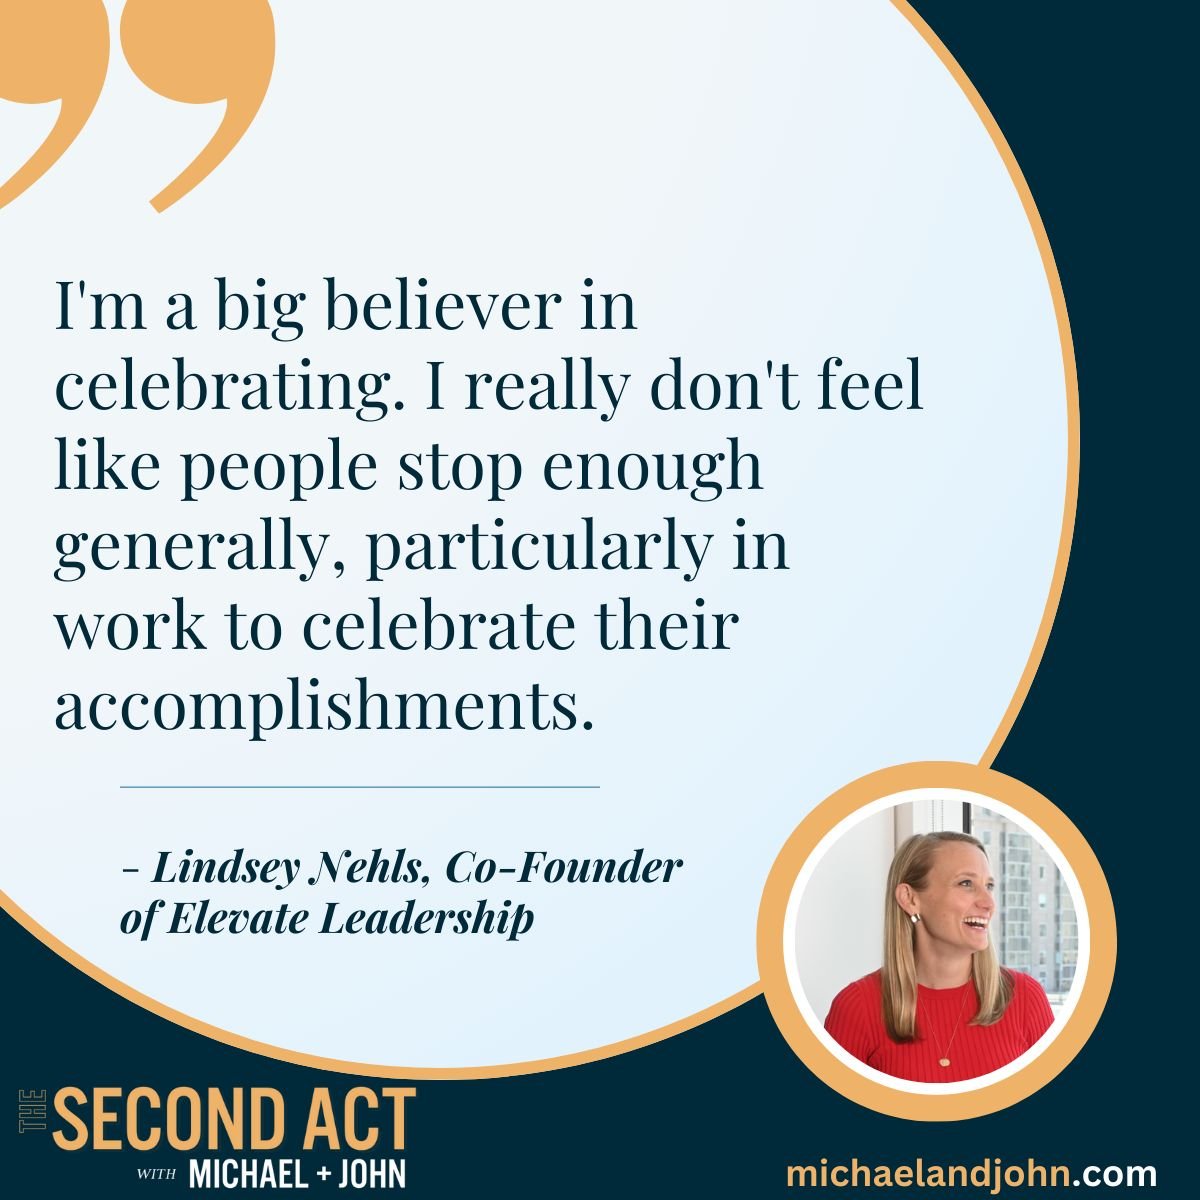 🎉✨ It's time to celebrate our successes! Lindsey Nehls, Co-Founder of Elevate Leadership, reminds us to take a moment to recognize our accomplishments at work. Let's spread positivity and celebrate each step forward. 🙌 #CelebrateSuccess #WorkLifeBa